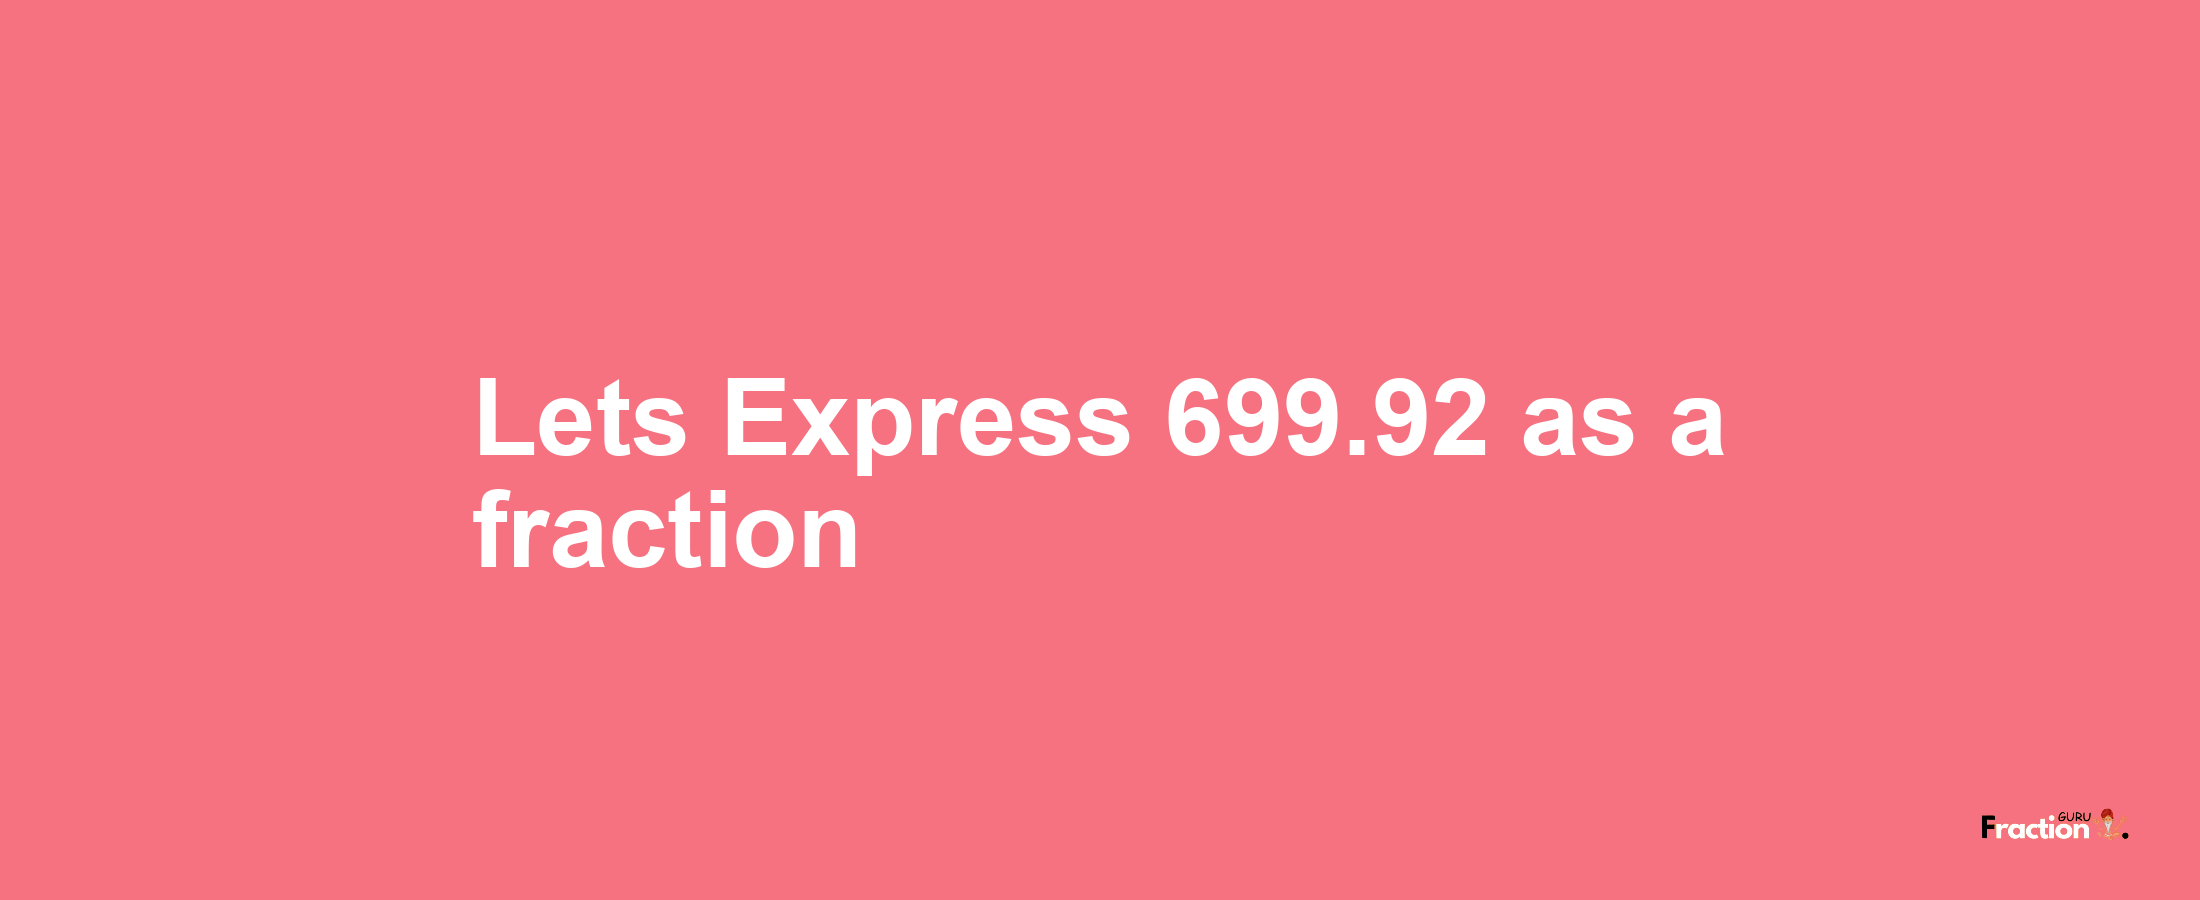 Lets Express 699.92 as afraction